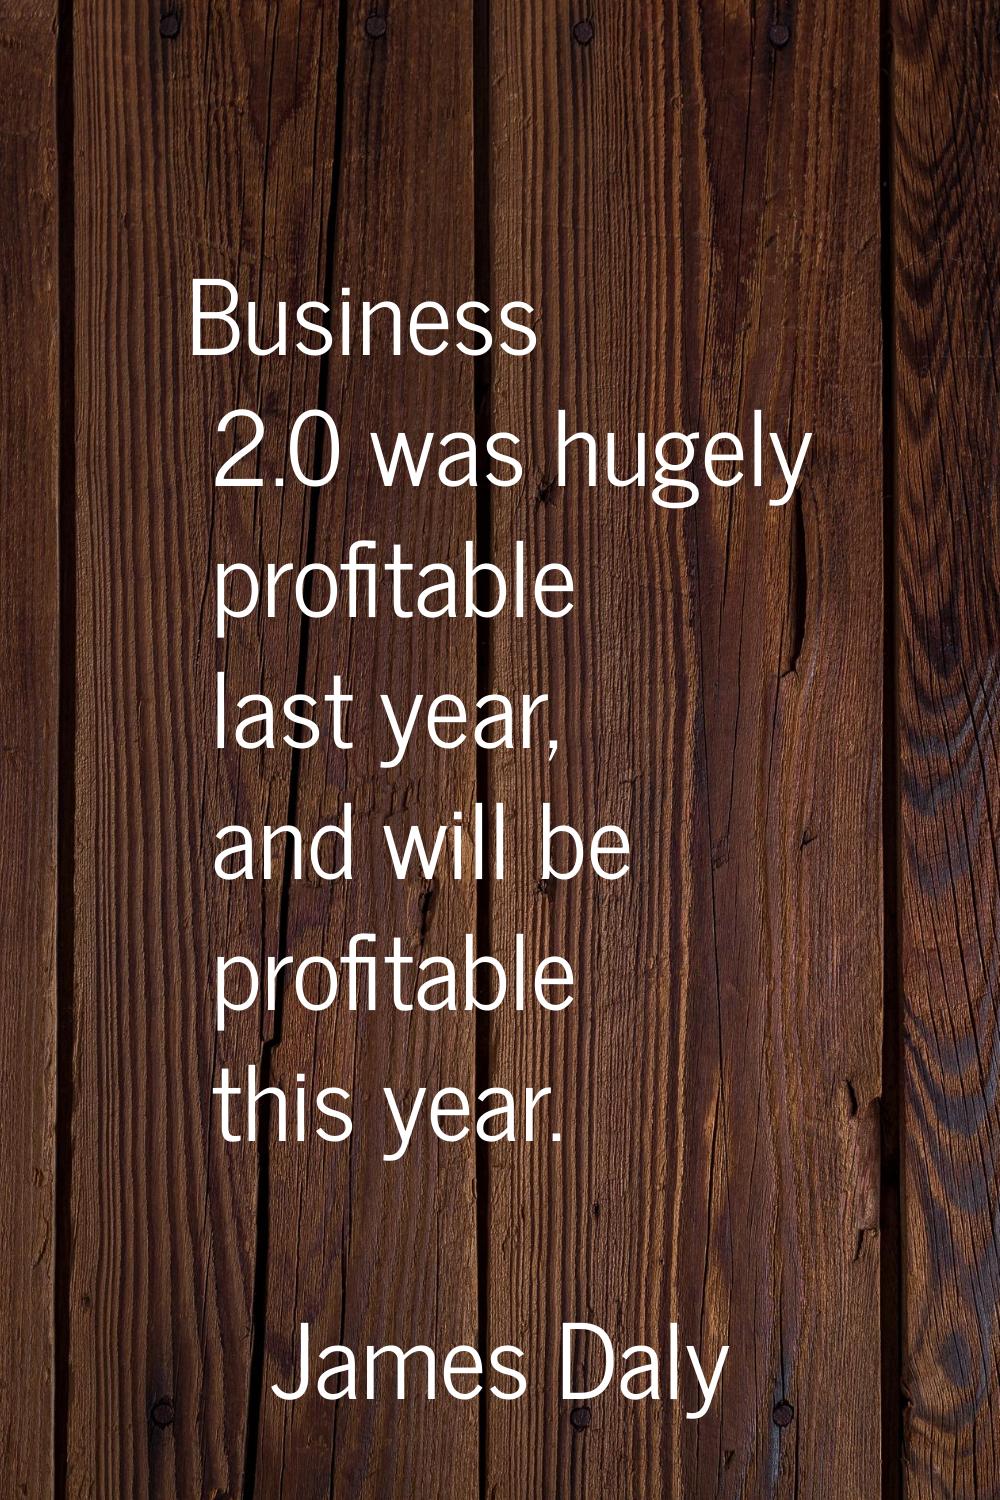 Business 2.0 was hugely profitable last year, and will be profitable this year.